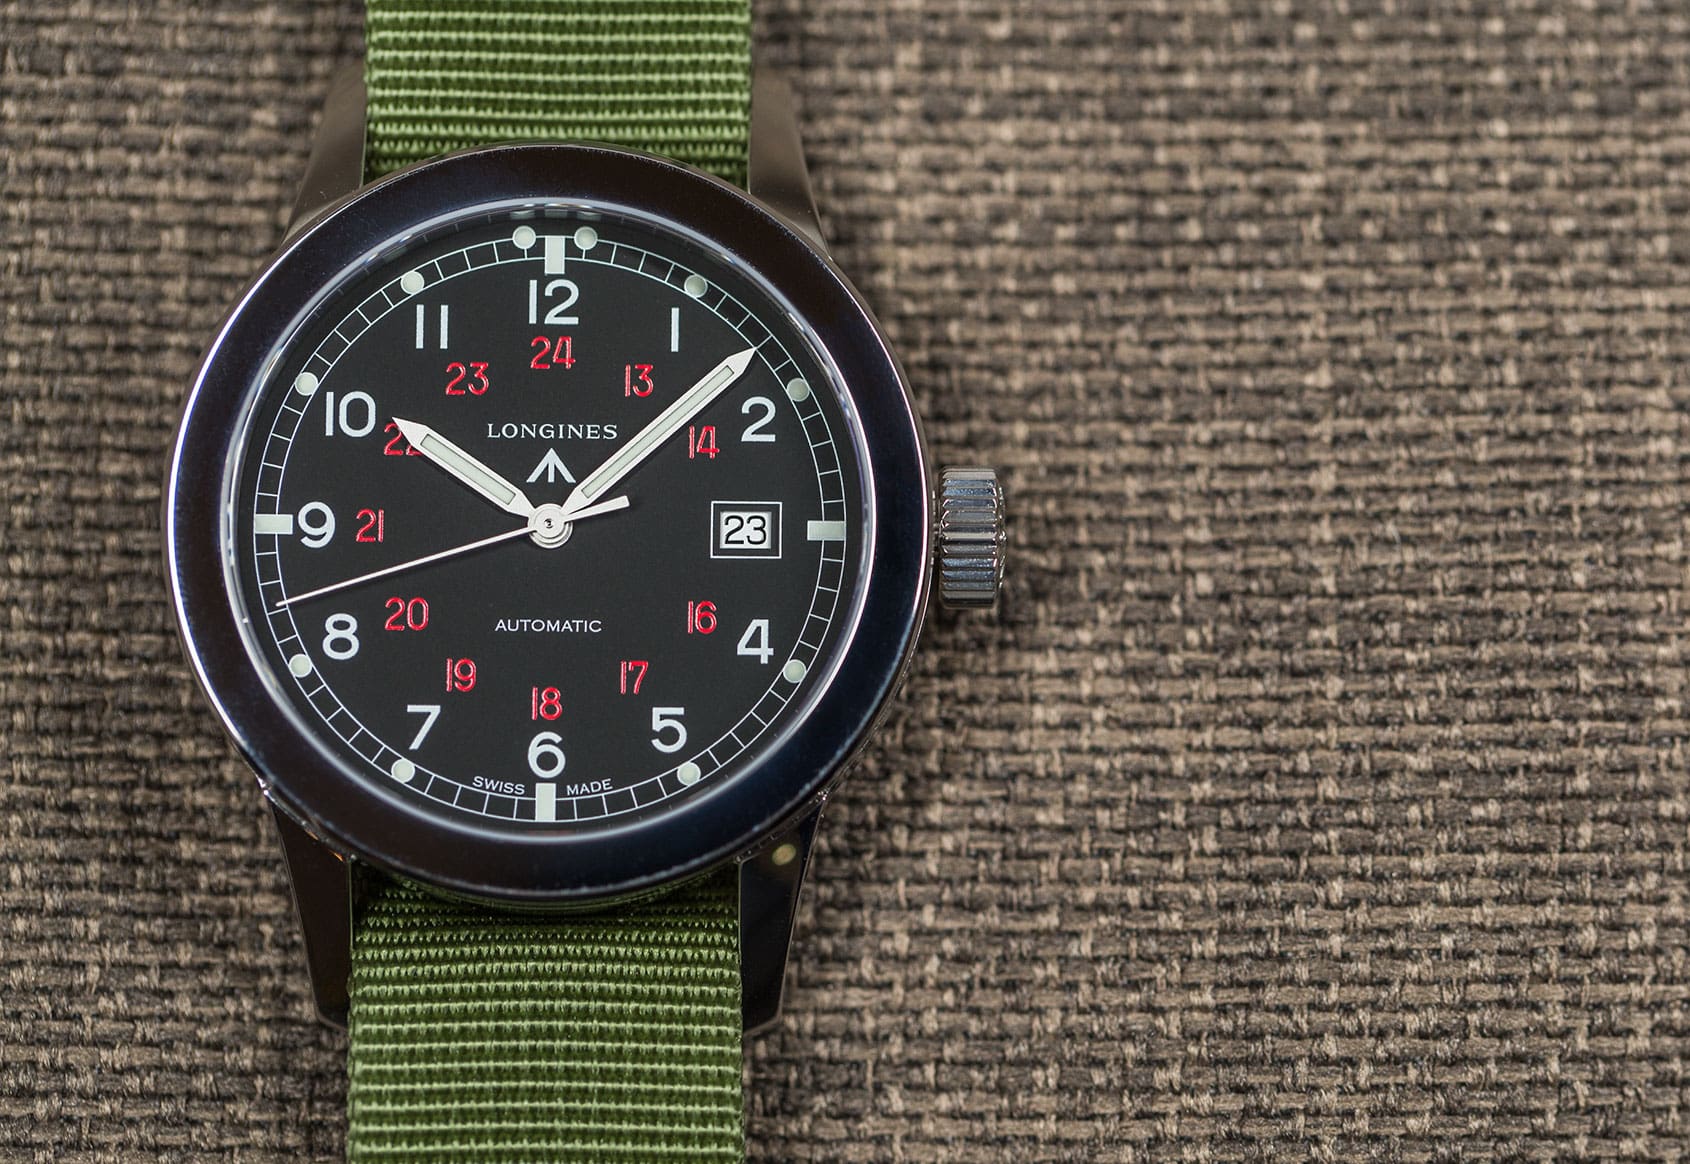 EDITOR’S PICK: Style warrior’s choice – the Longines Heritage Military COSD